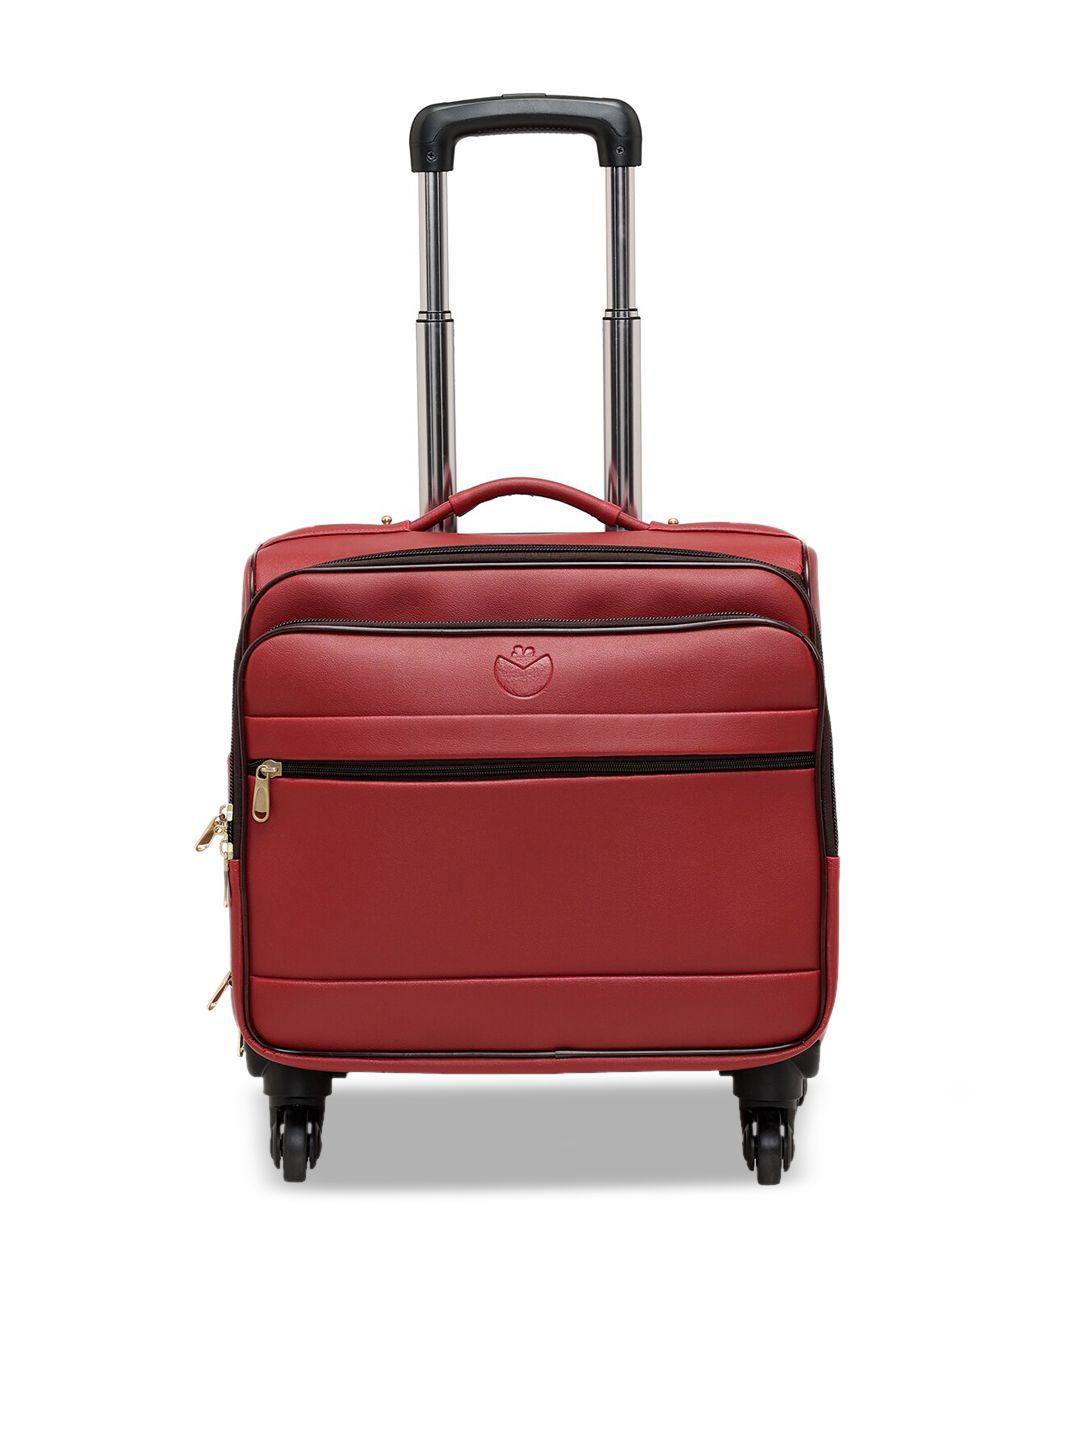 mboss red solid soft-sided cabin laptop overnighter trolley suitcase